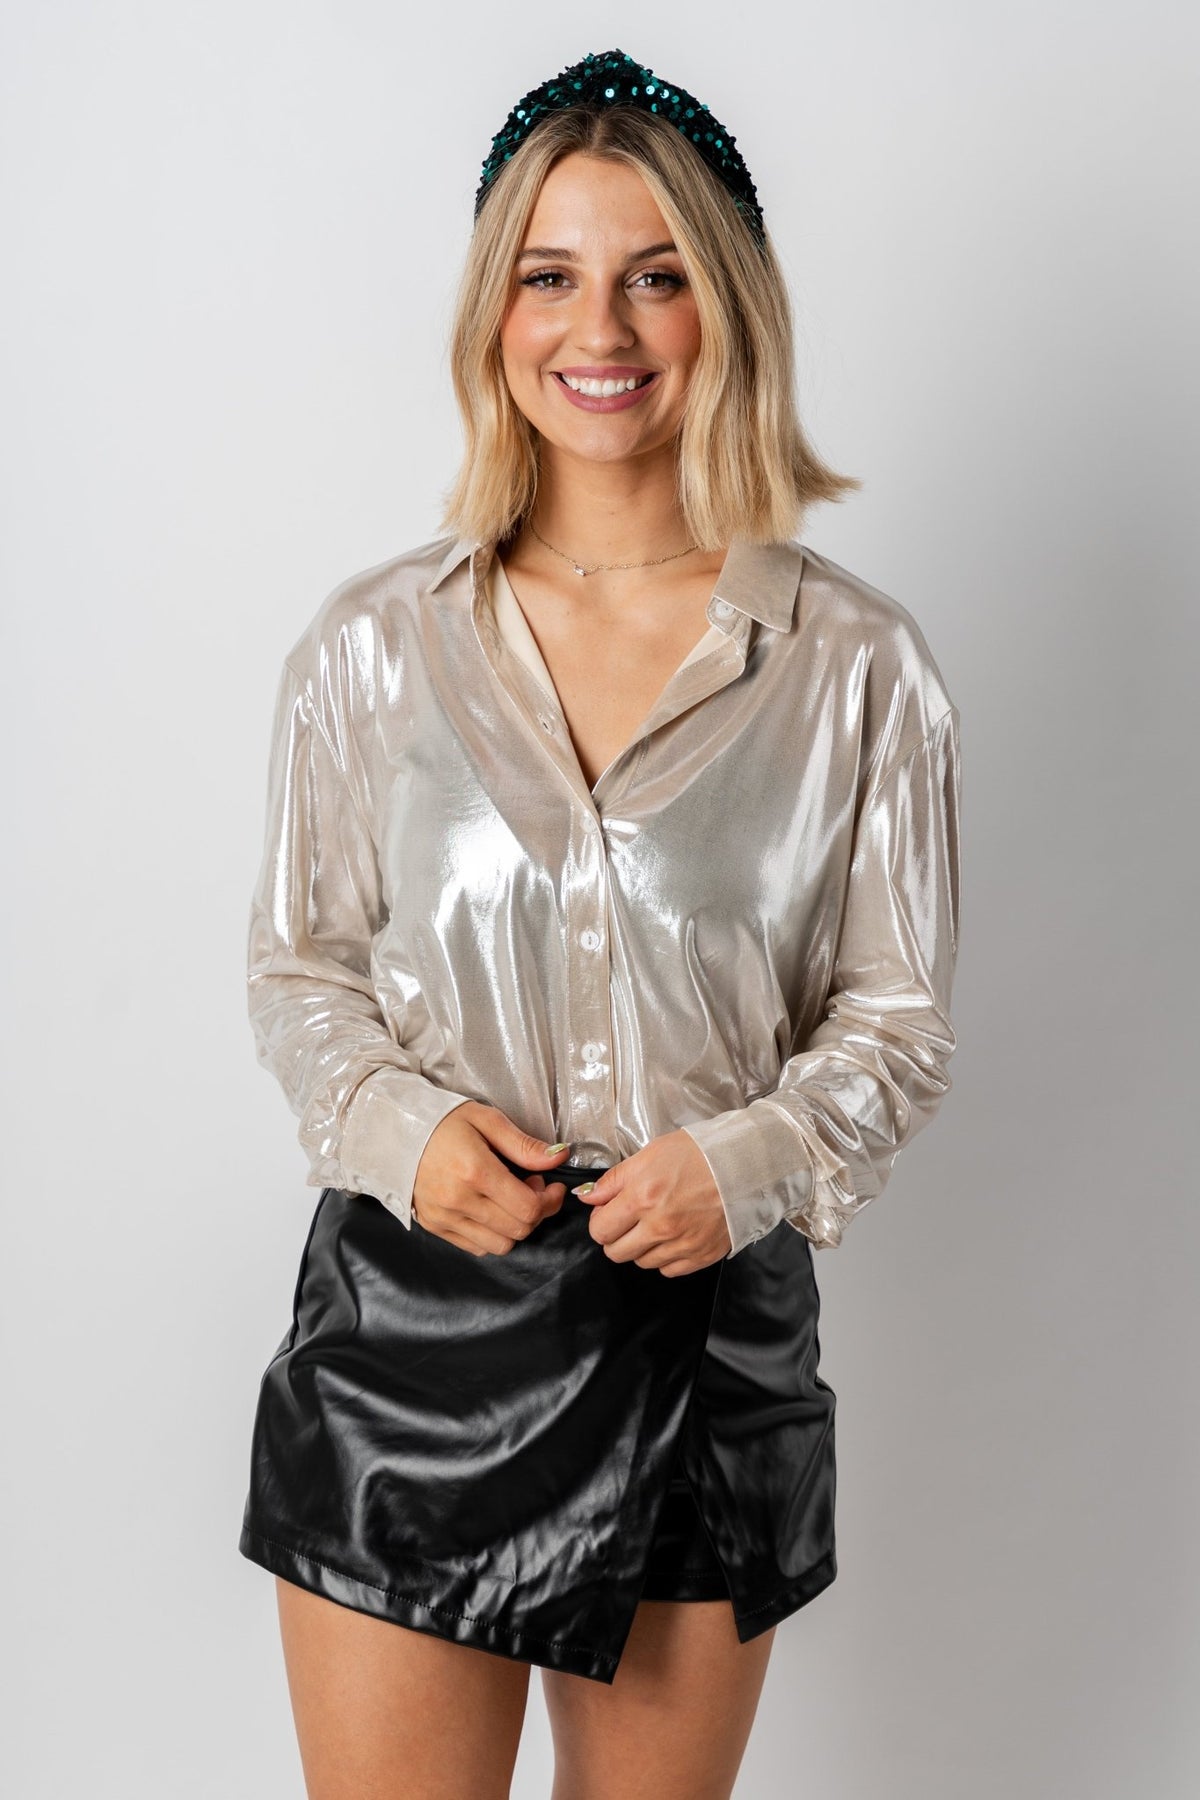 Metallic button up top champagne - Trendy Holiday Apparel at Lush Fashion Lounge Boutique in Oklahoma City